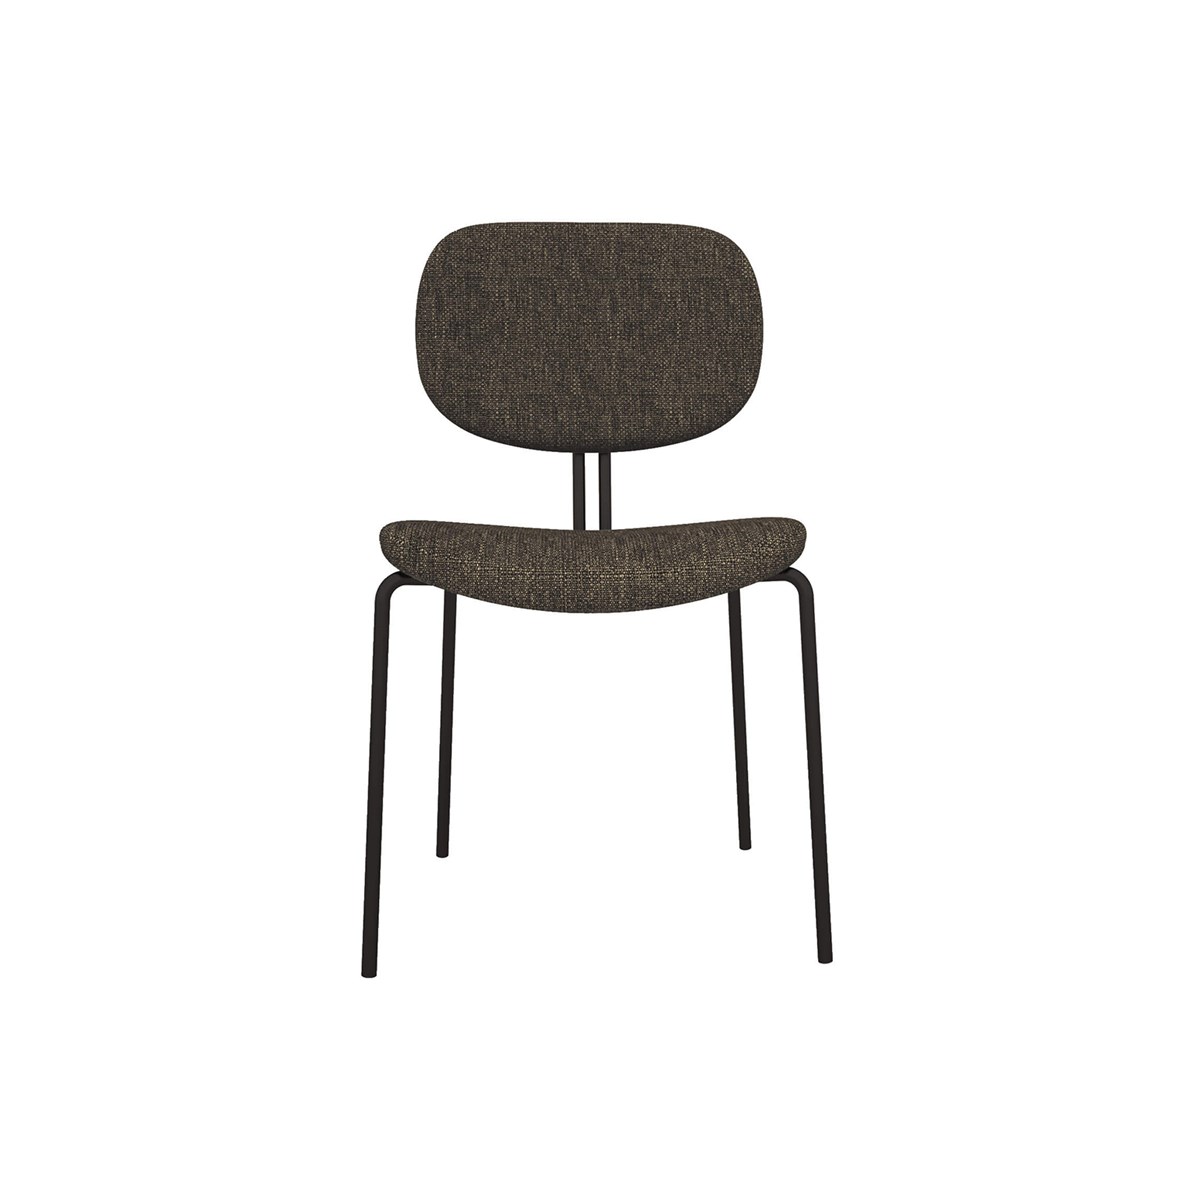 Neospace-Panama-Chair-Contract-Matisse-1 (1)